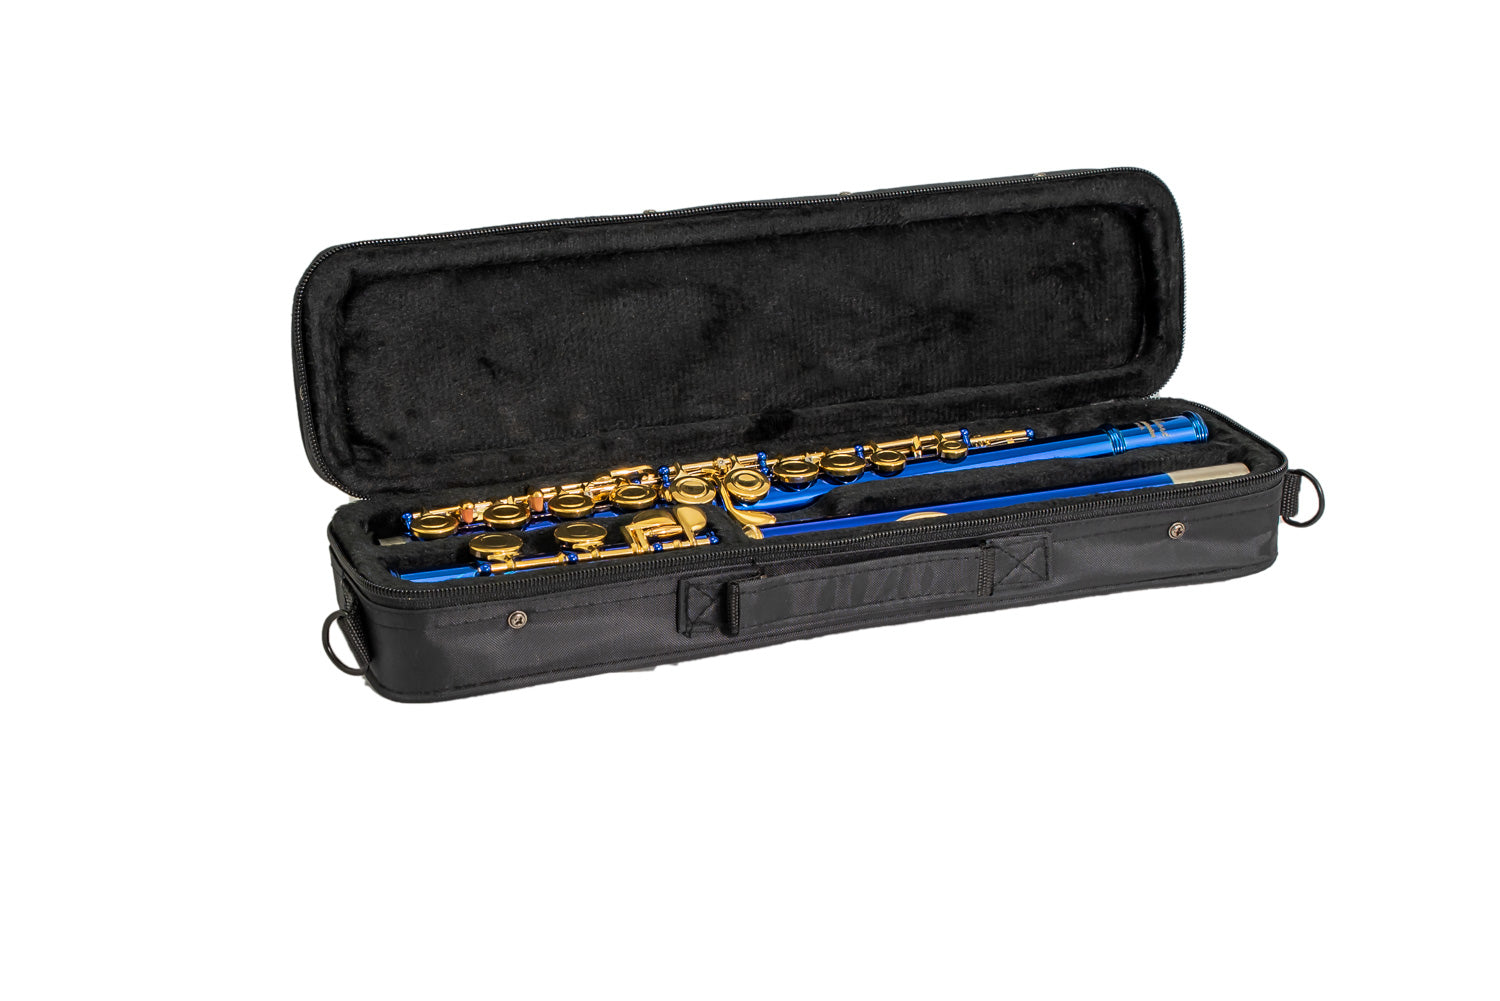 Elkhart by Vincent Bach Flute 100FLBL with Case in Blue | Spilt E Mechanism Offset G - RRP £279 Buy Now in Sale At Half Price For £139 - Only Few Left!